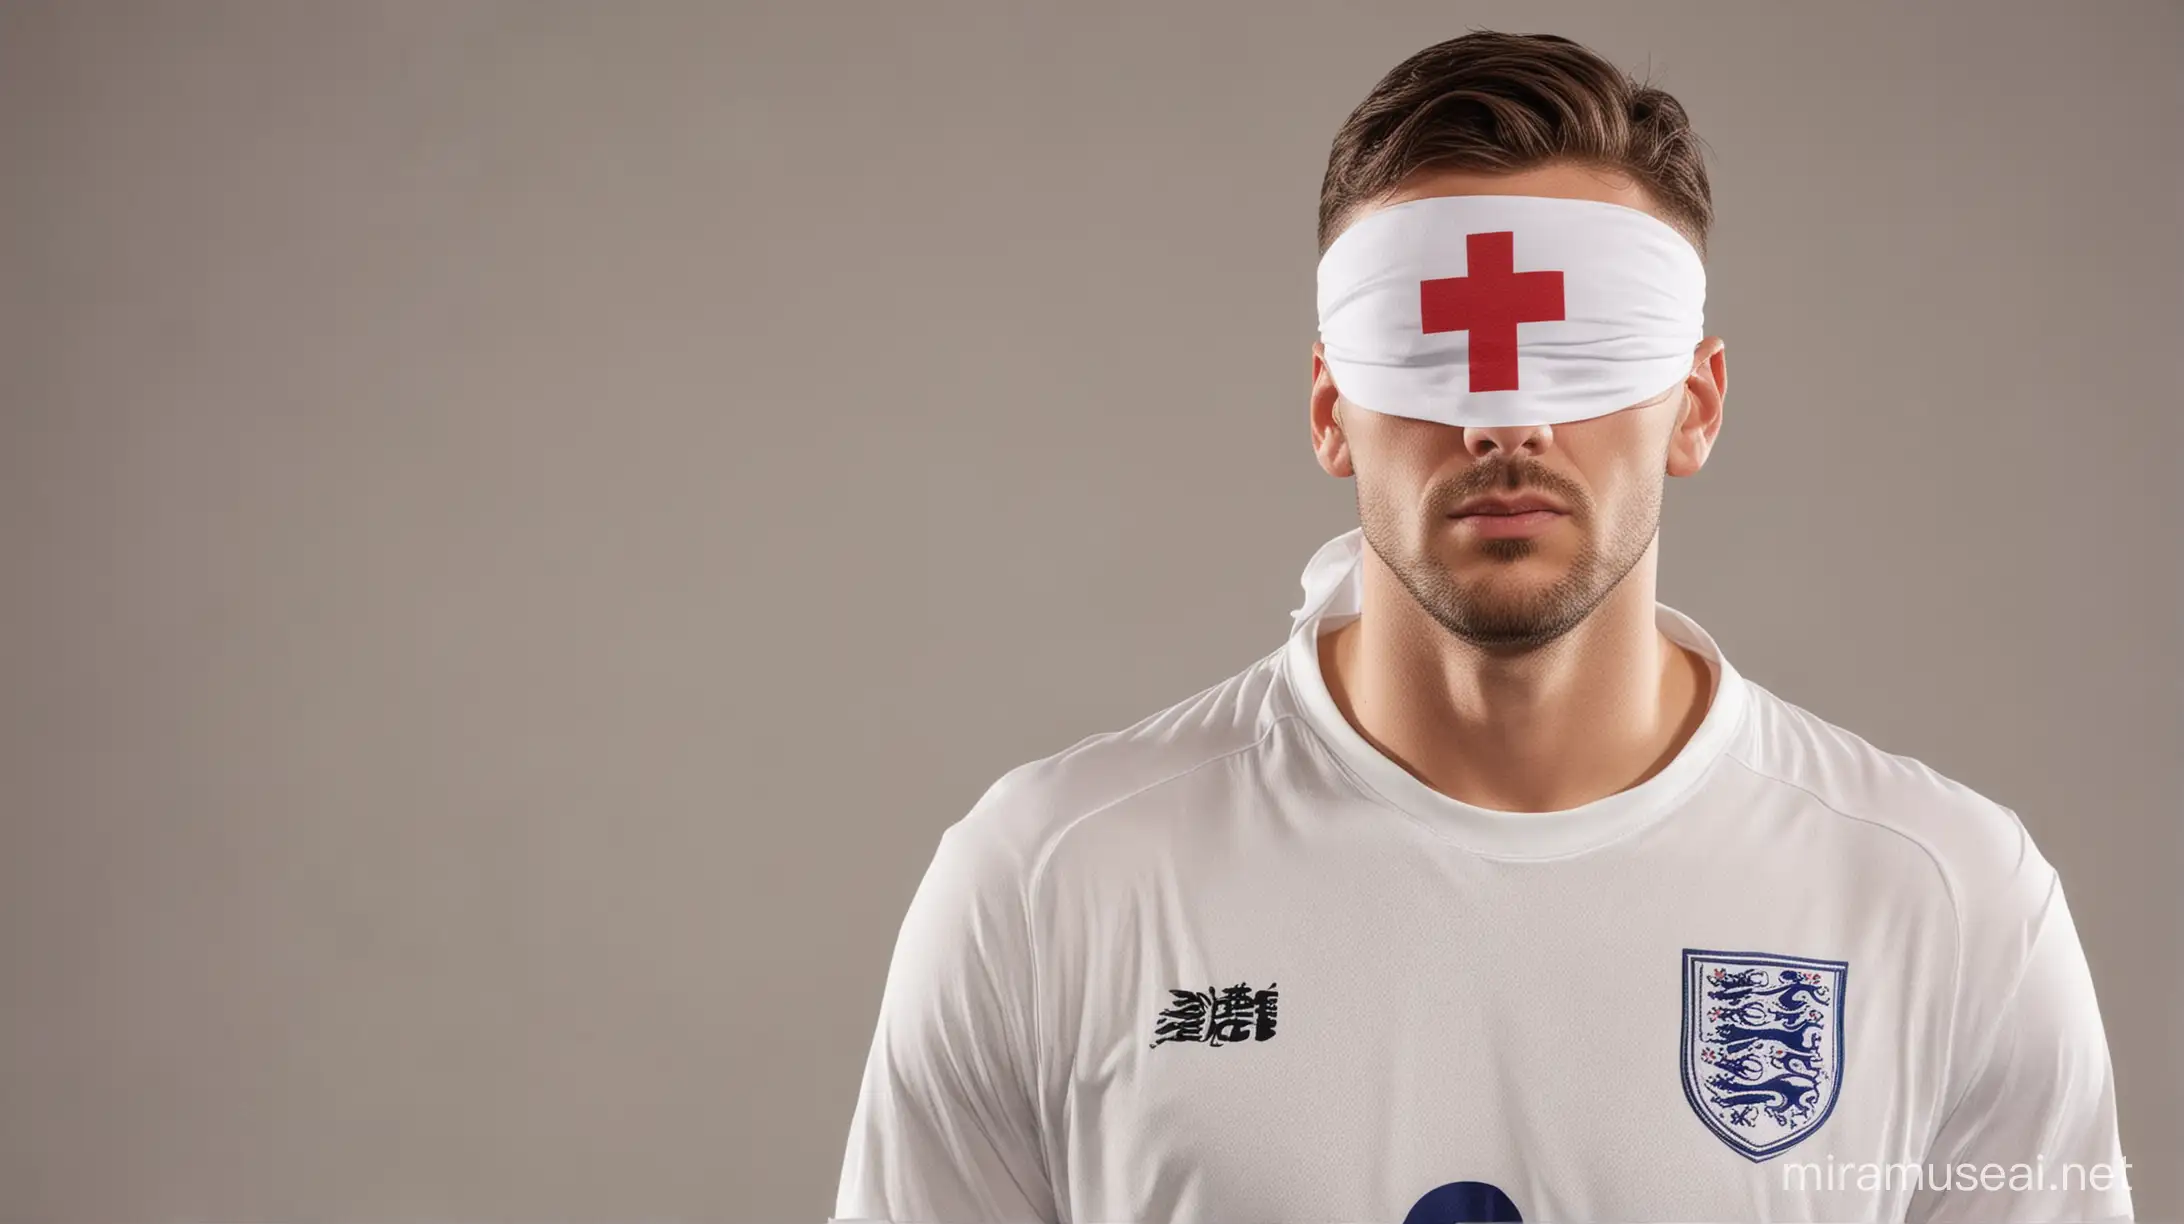 show me a realistic blindfolded man with an england football team jersey ready to take a penalty 
